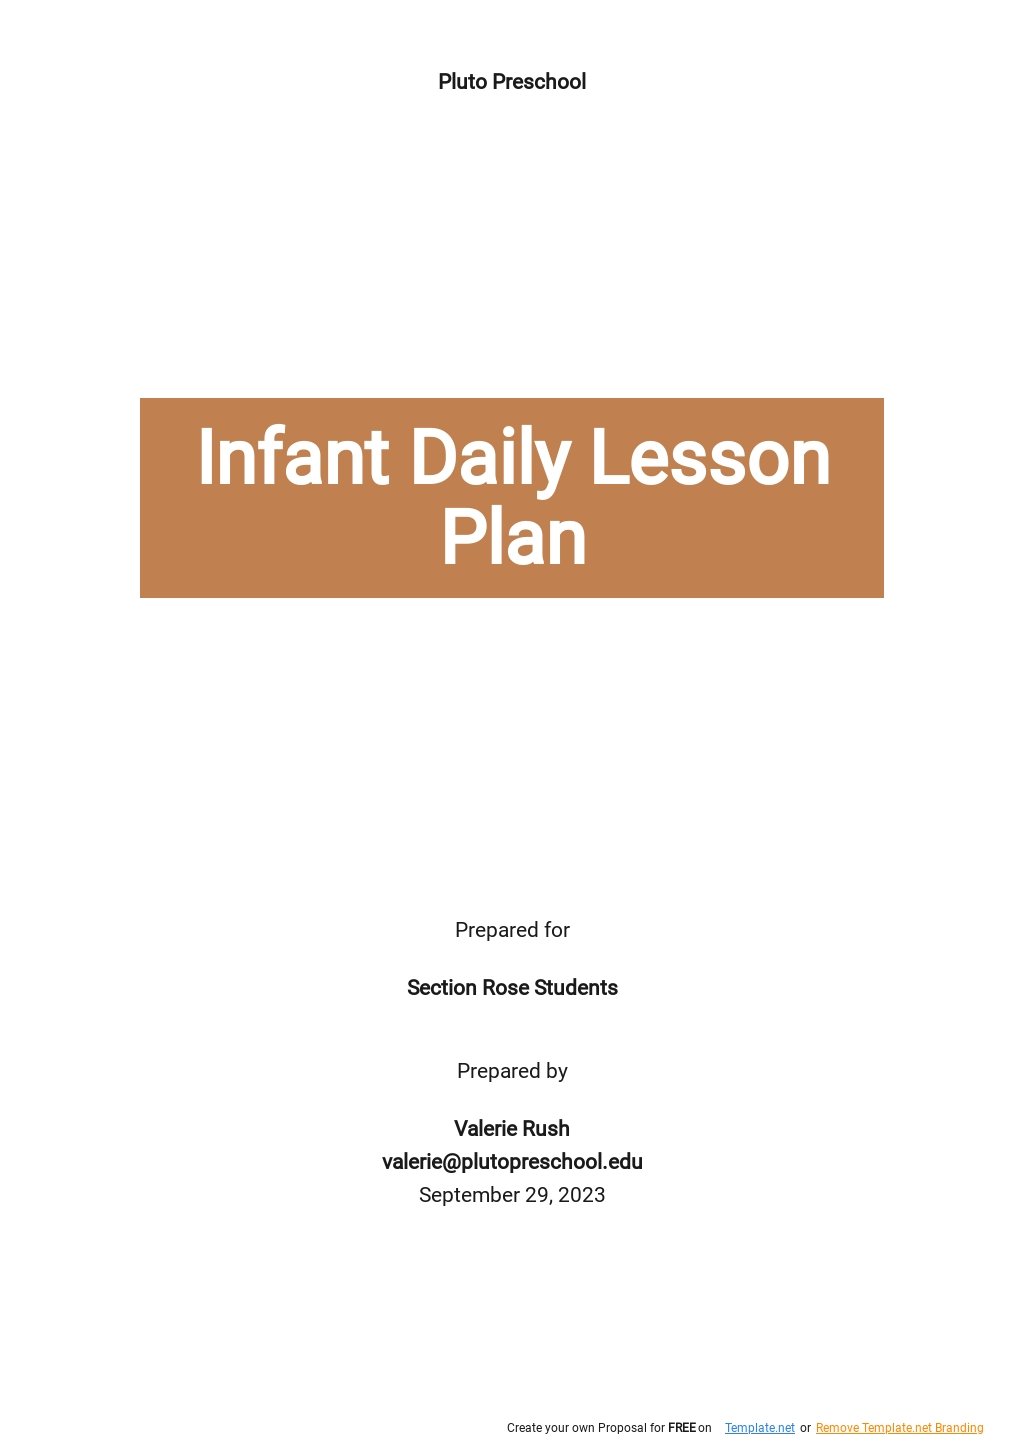 Infant Daily Lesson Plan Template.jpe